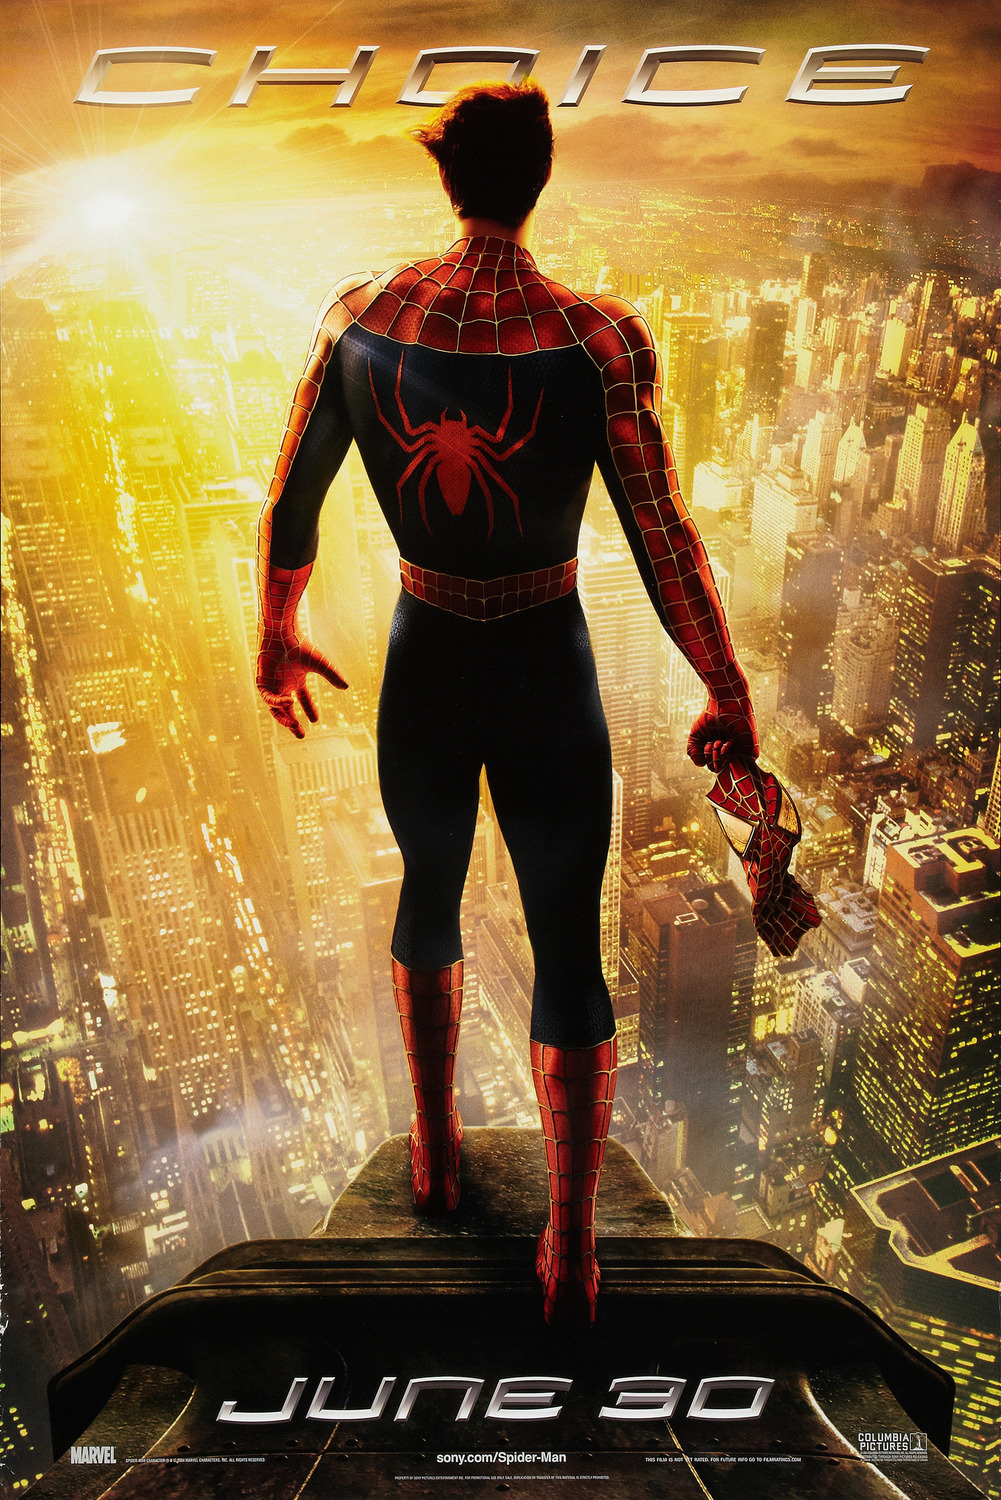 Extra Large Movie Poster Image for Spider-man 2 (#5 of 6)